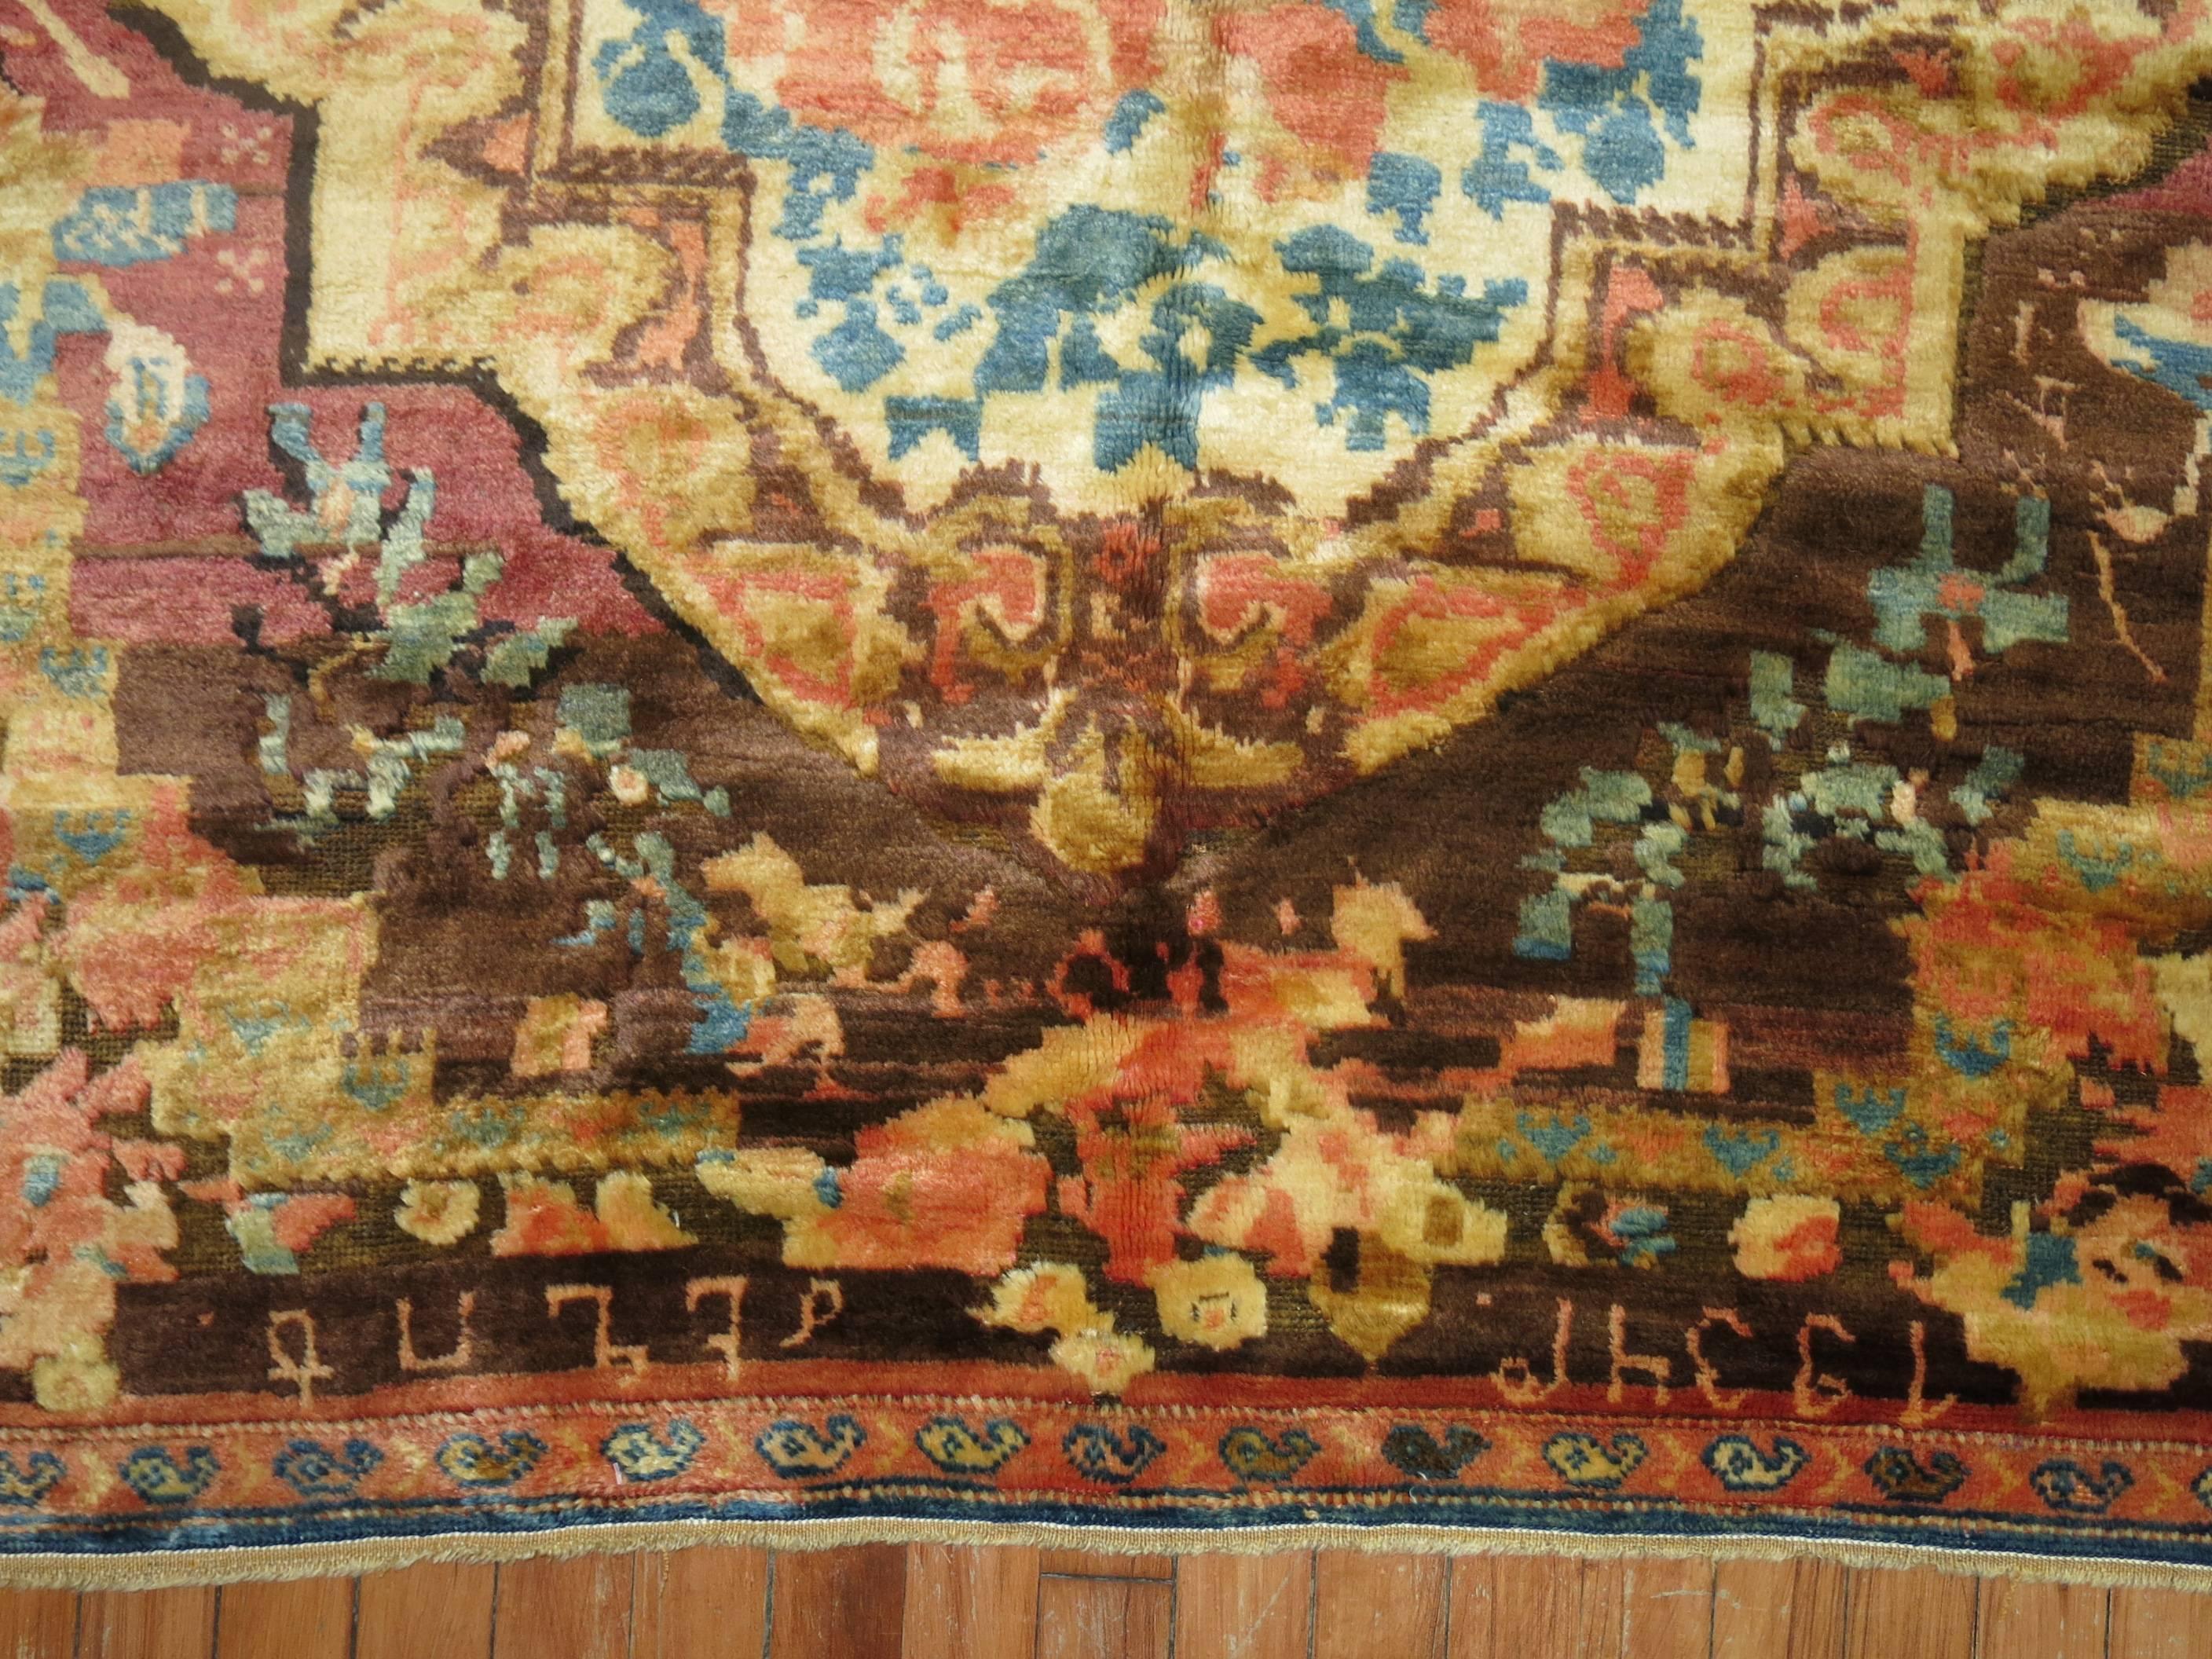 A floral motif karabagh rug dated 1934 signed by weaver. The wool has a silky feel and sheen to it. Predominantly muave, peach and brown accents.

4'5'' x 5'10'' dated 1934.